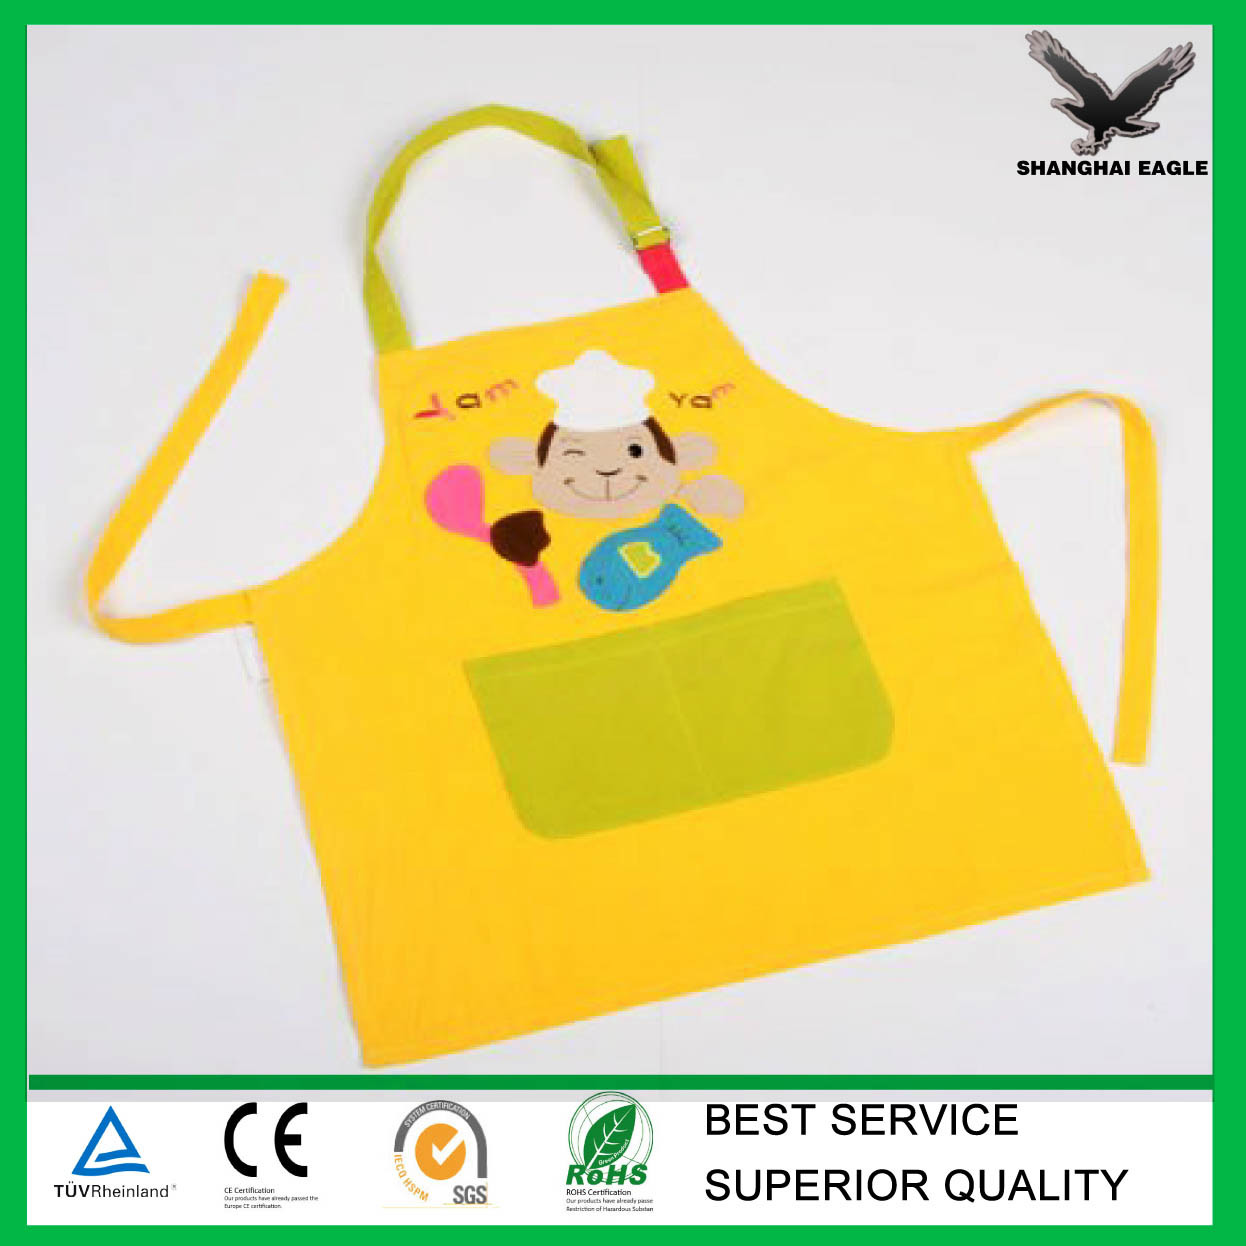 Rusuable Polyester Apron for Kids